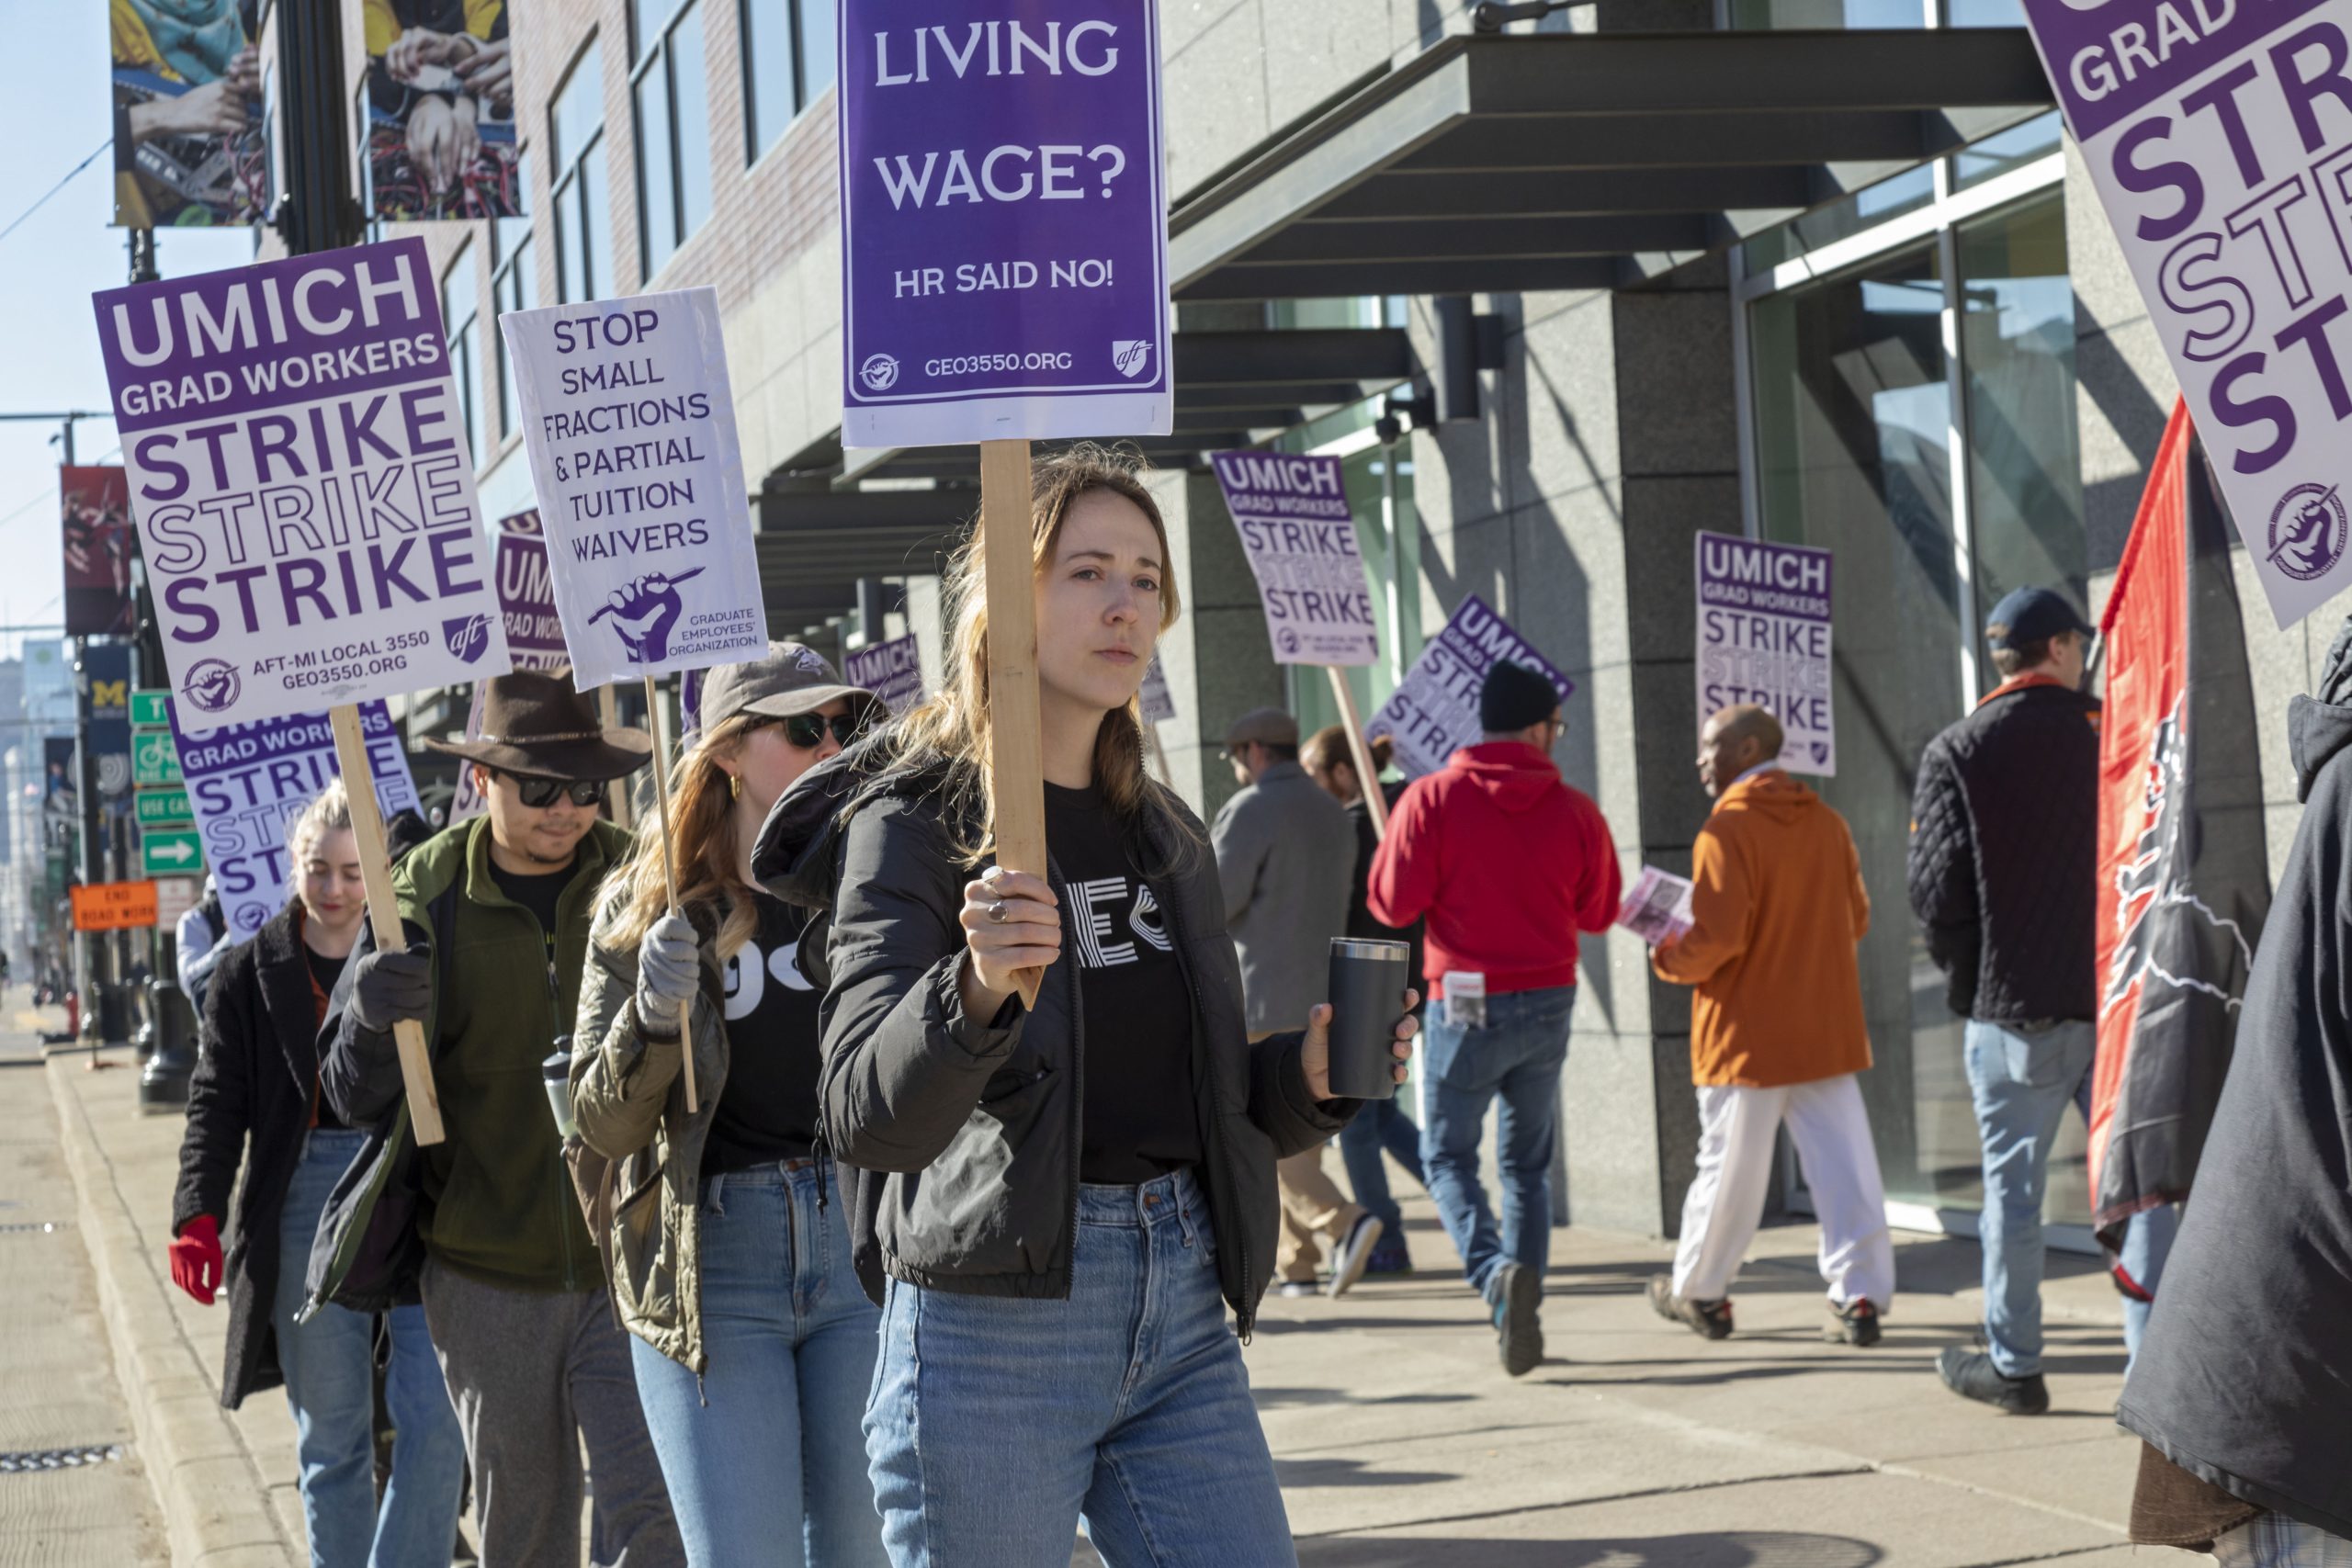 Graduate student employees at the University of Michigan picket the universitys Detroit Center during their strike for a living wage on April 3, 2023.